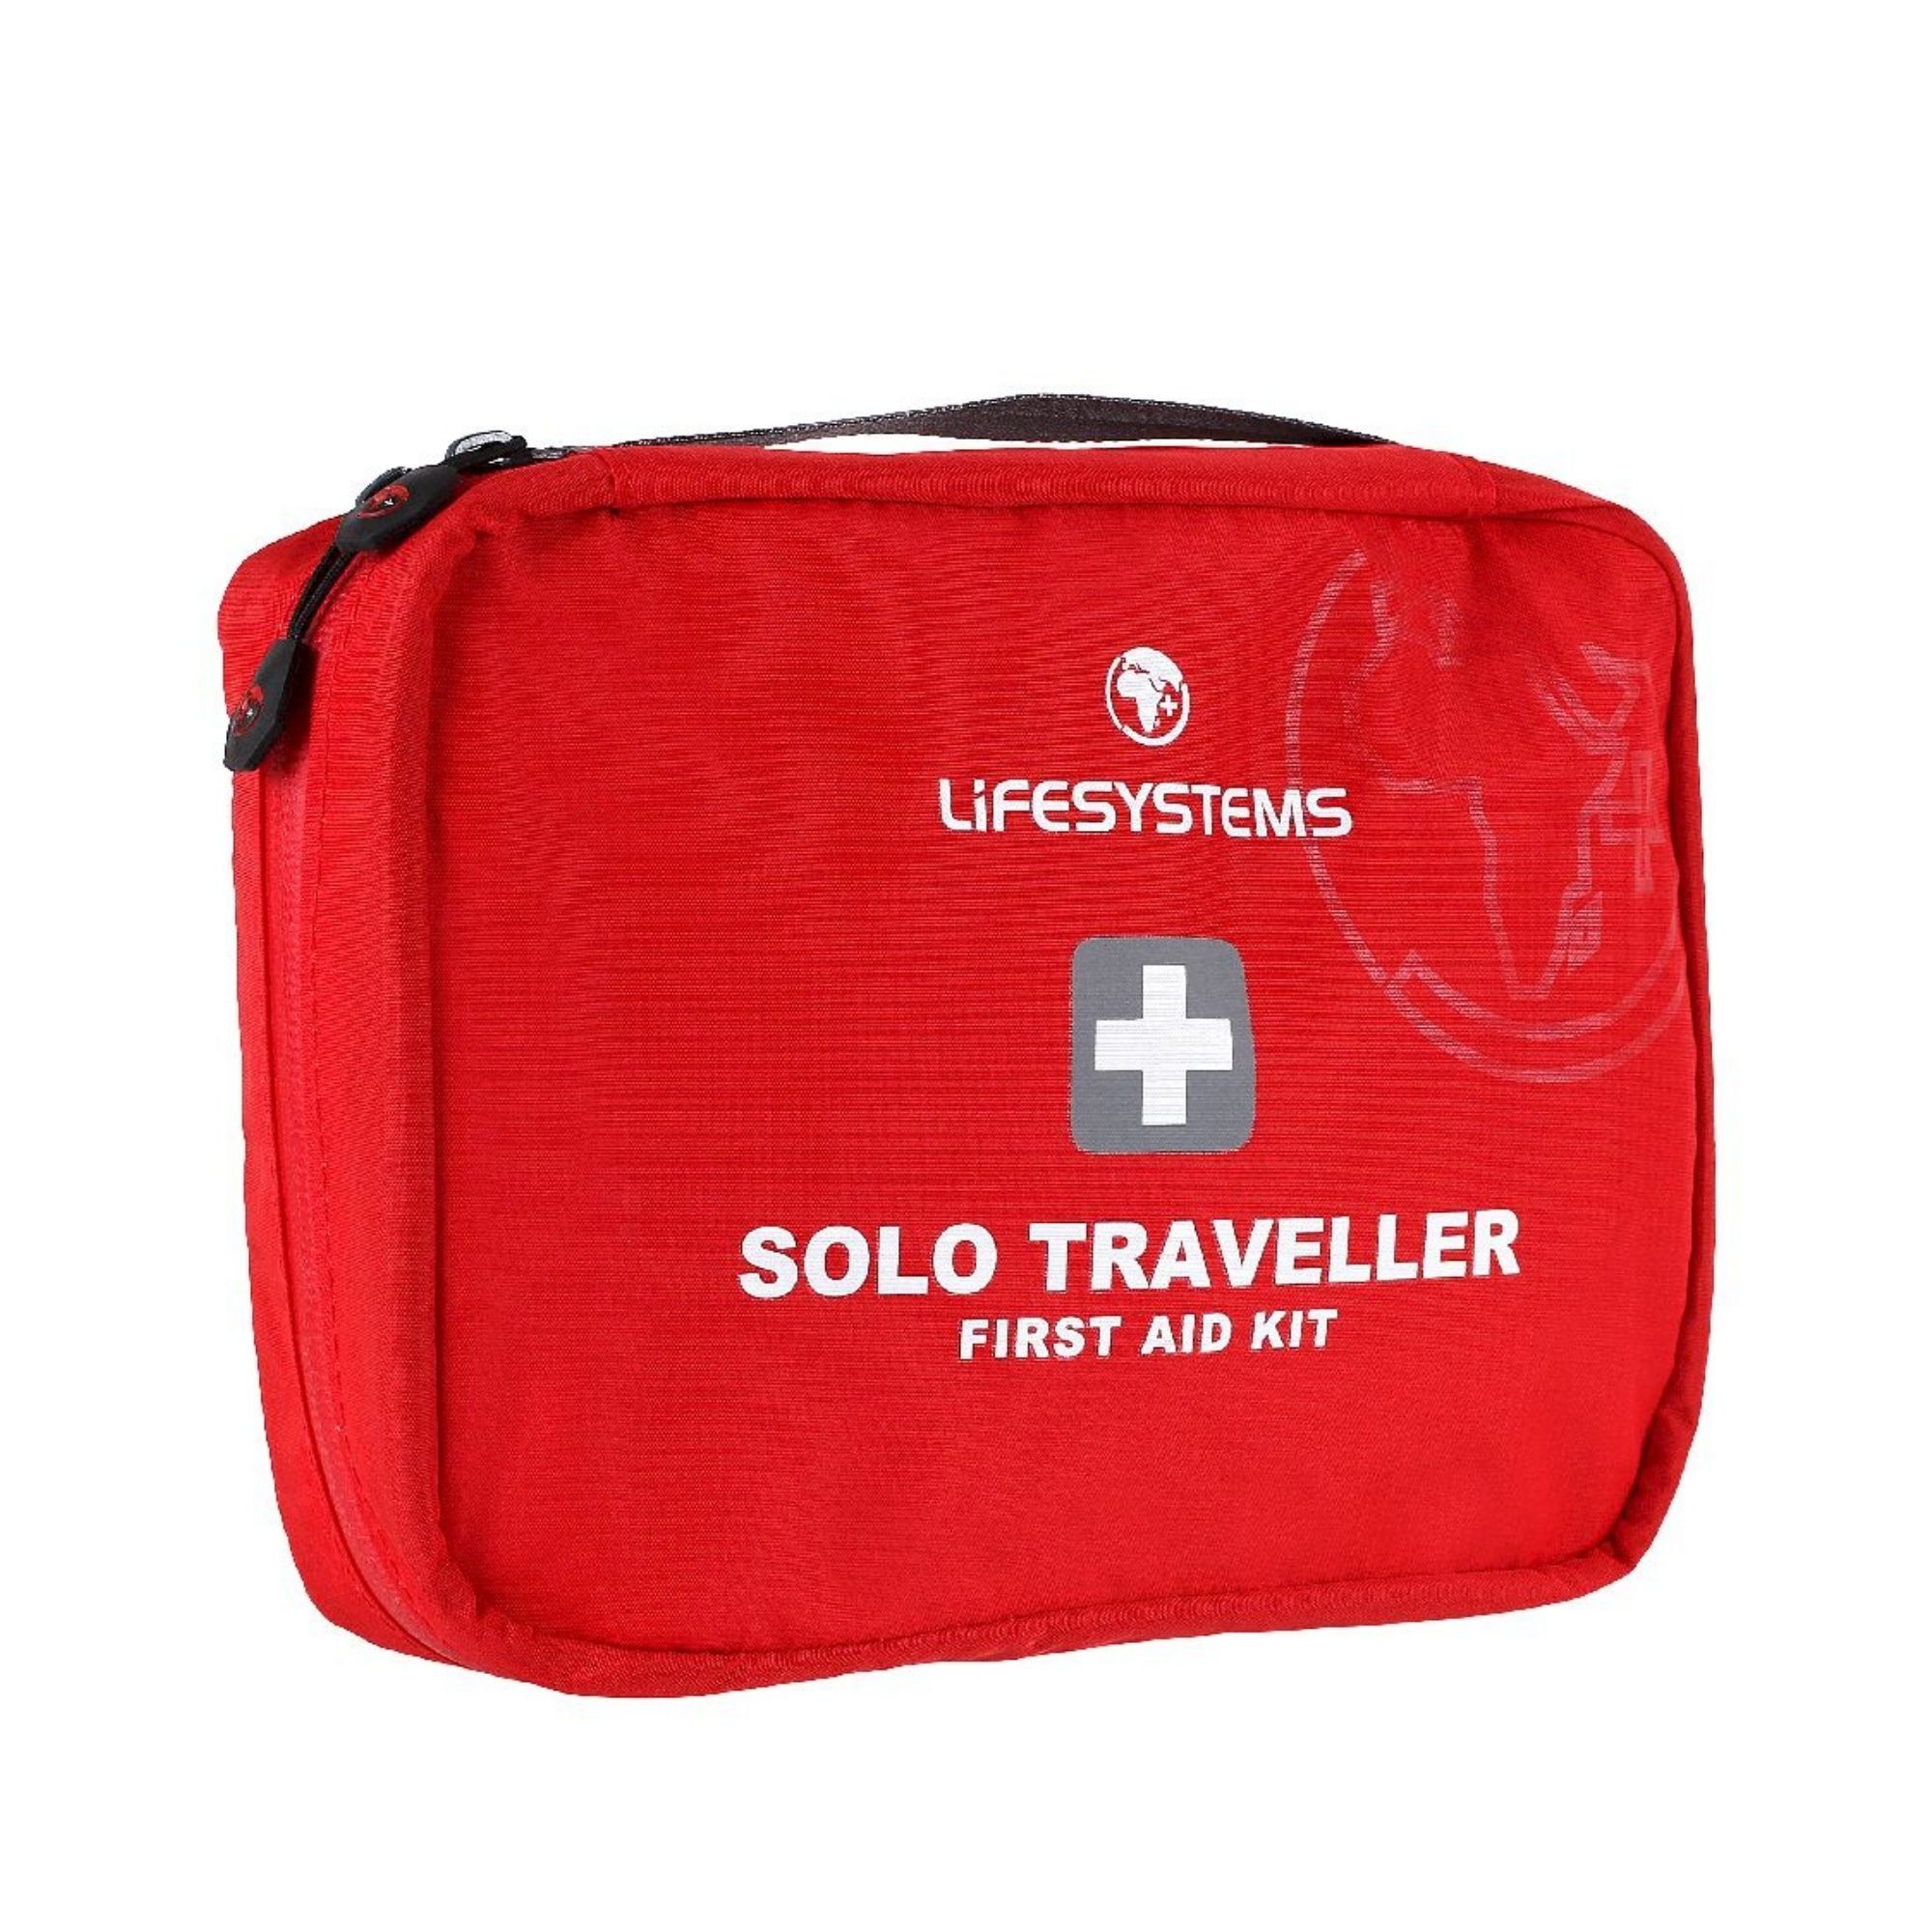 LittleLife Solo Traveller Travel First Aid Kits - EHBO-set